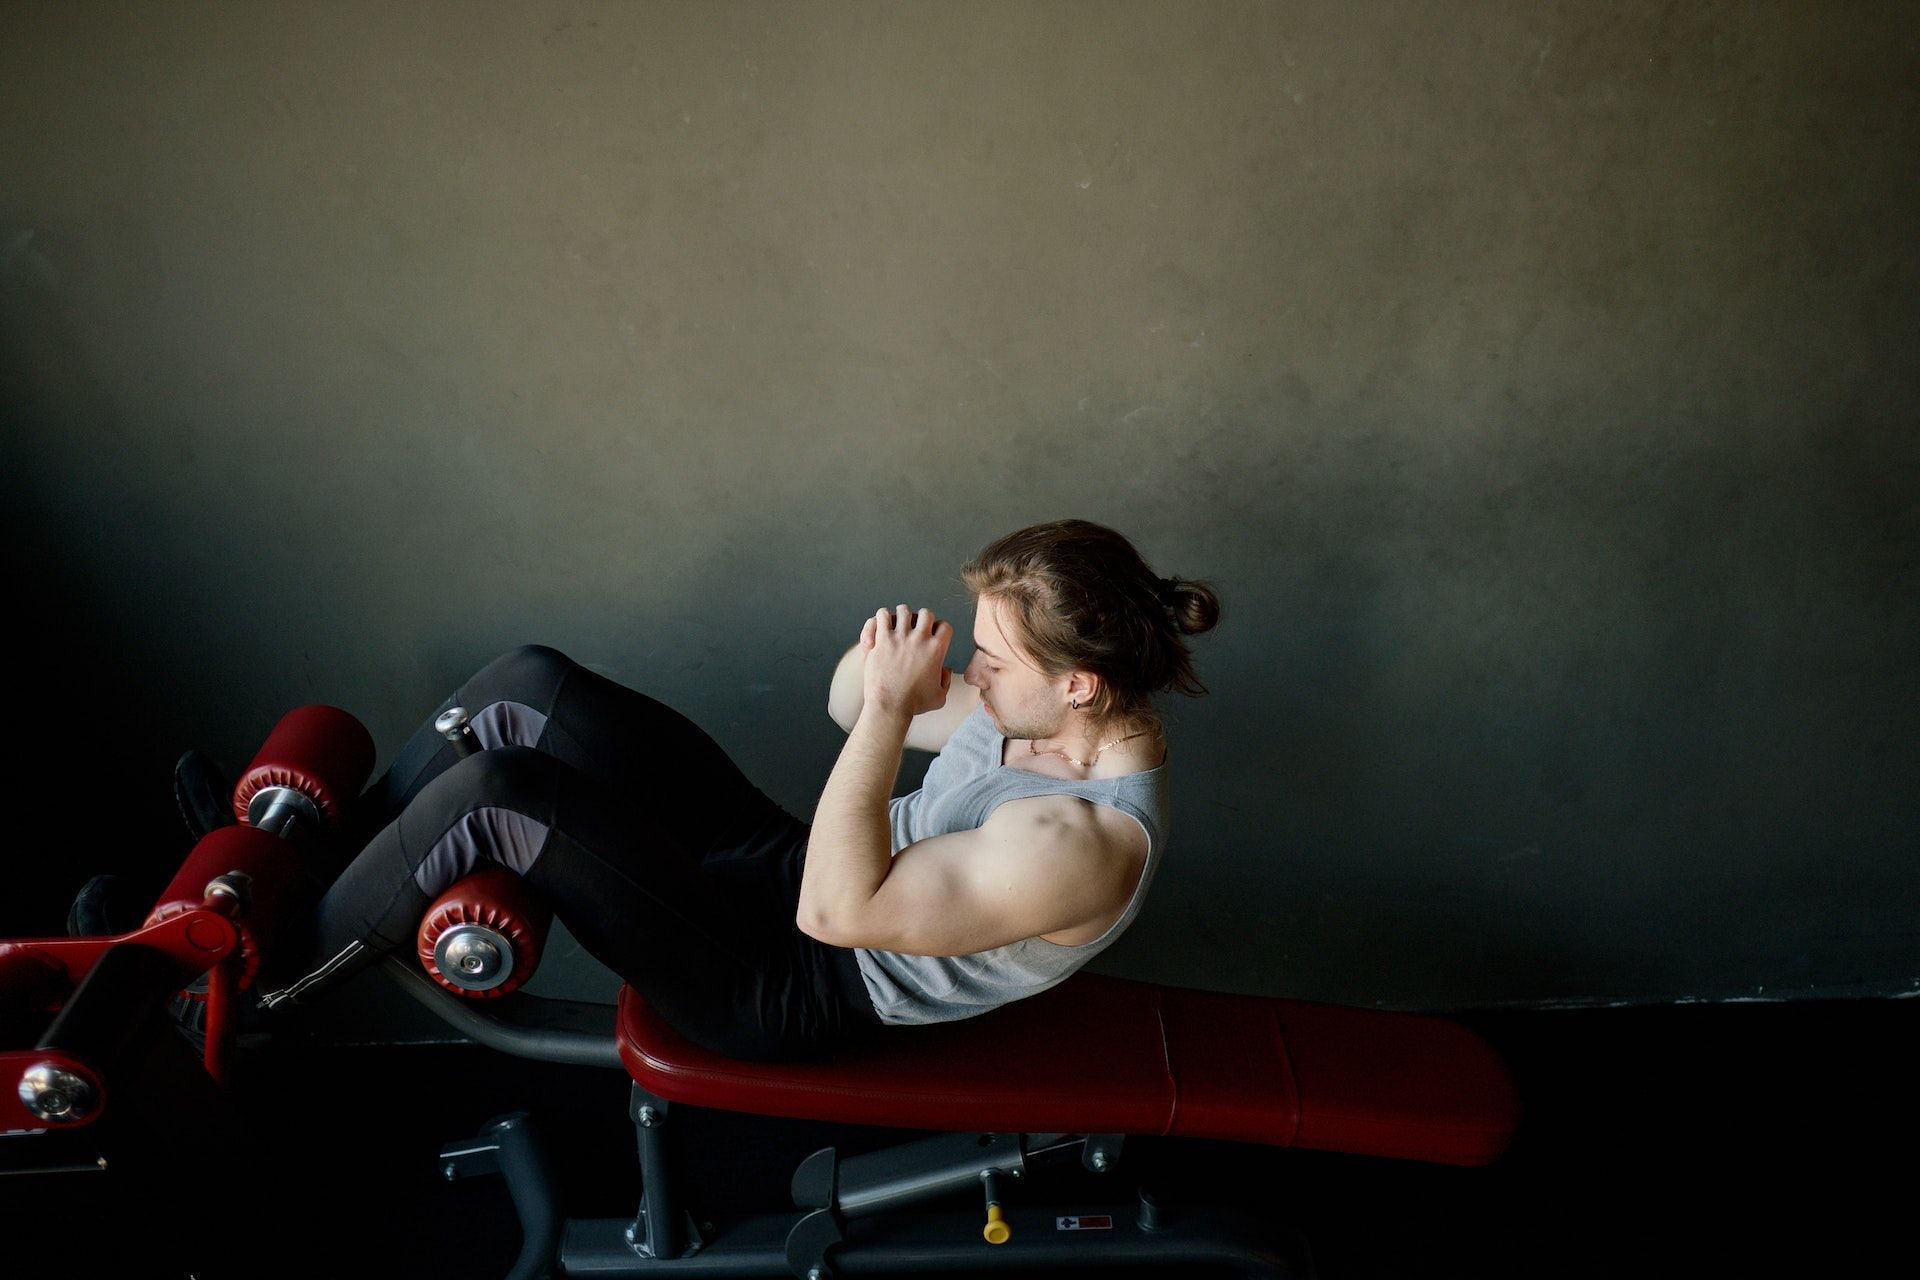 Core exercises strengthens the abs and improves posture. (Photo via Pexels/Ivan Samkov)